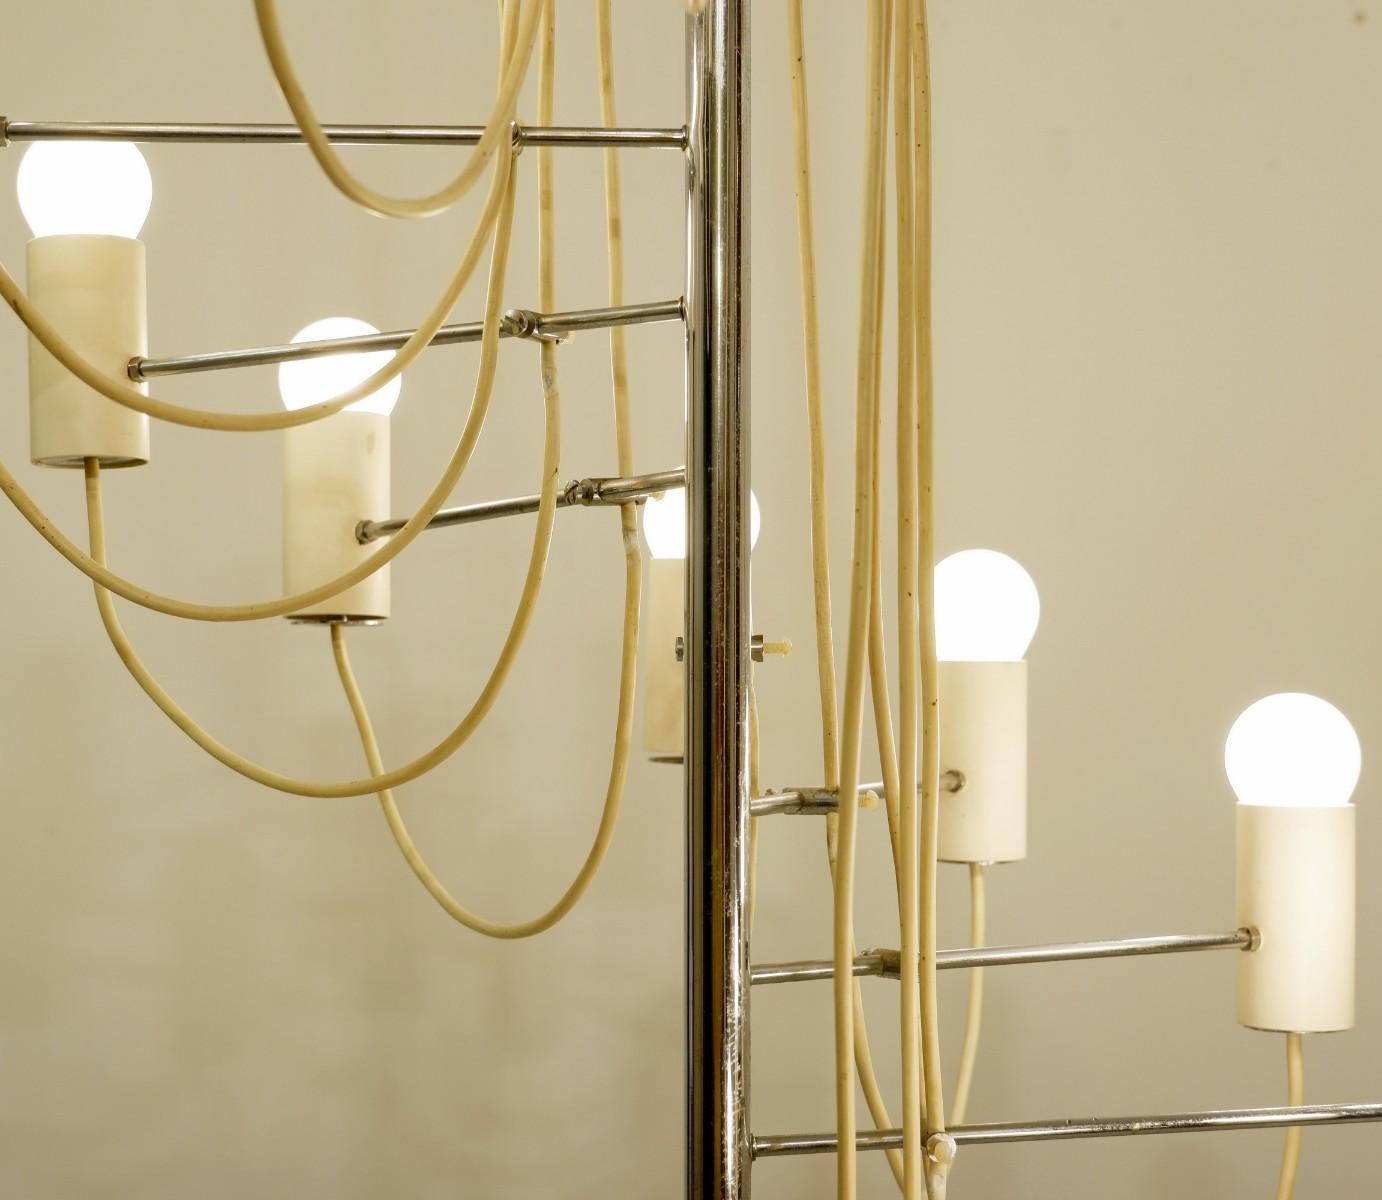 French Midcentury Minimalist 'A16' chandelier by Alain Richard for Disderot.